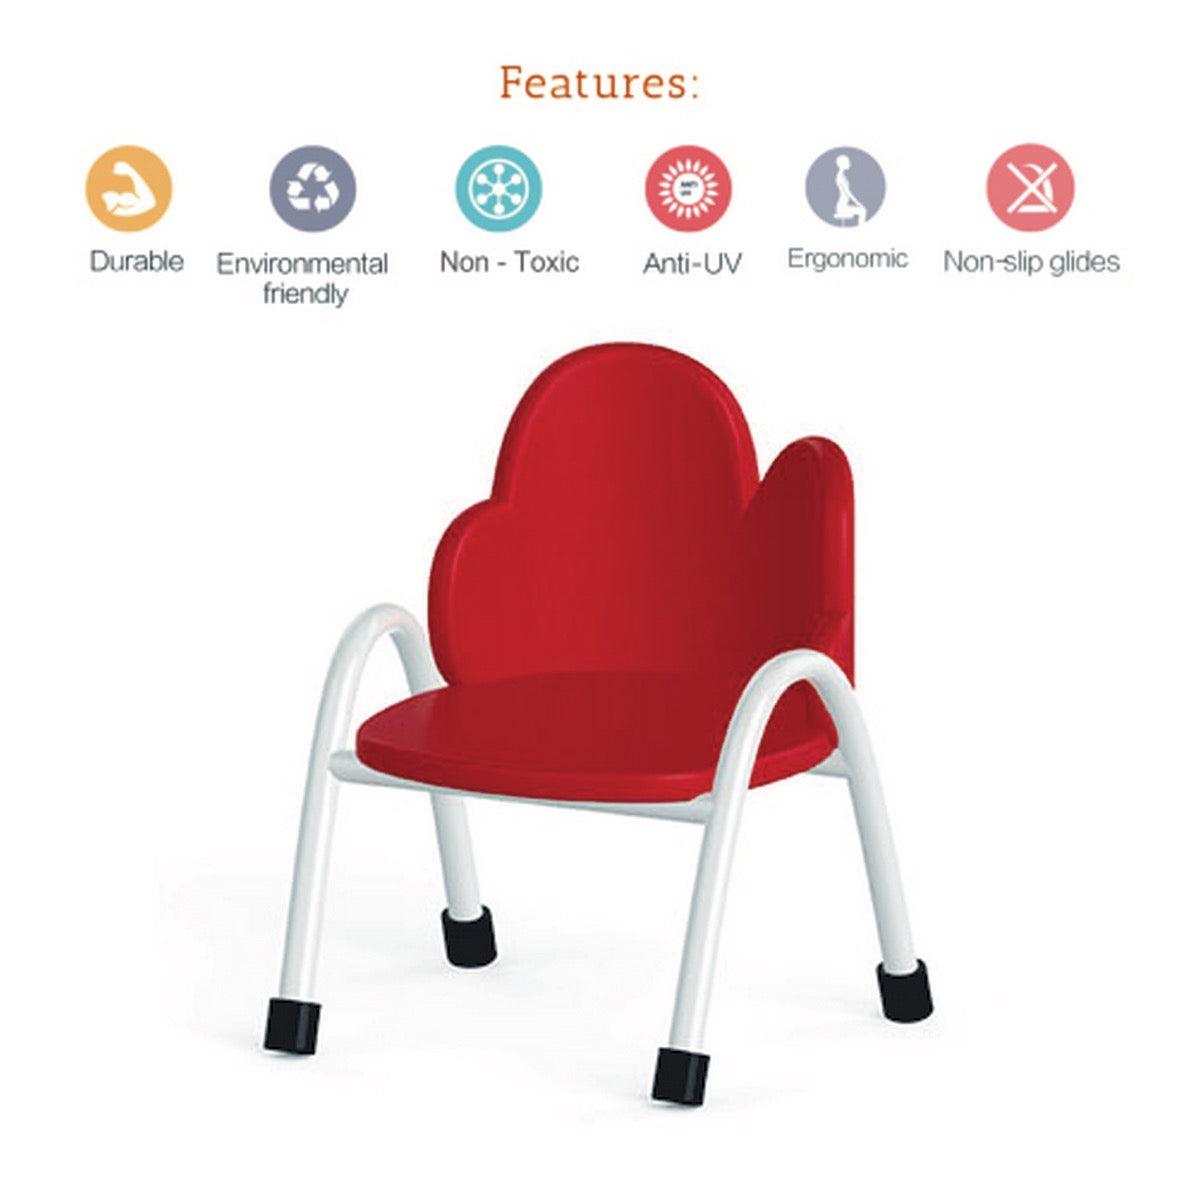 Ok Play Cloud Chair, Study Chair, Sturdy And Durable Chair, Plastic Chair, Perfect For Home, Creches And School, Red, 5 to 10 Years, Height 12 Inches